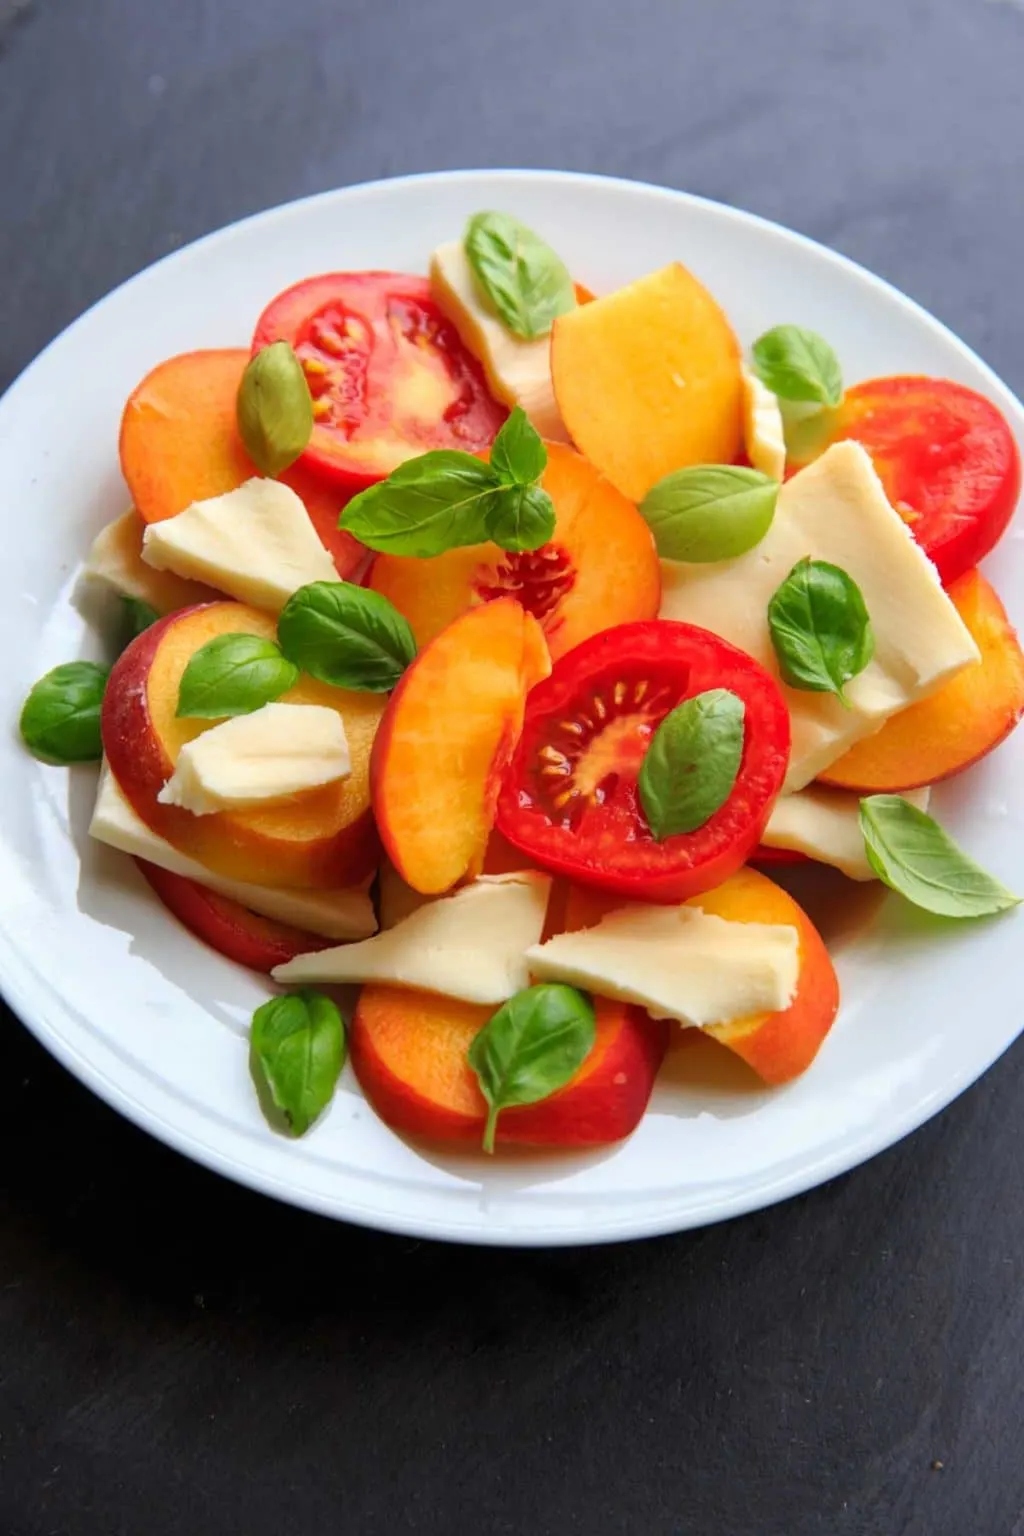 slides peaches and tomato with basil leaves and cheese on white plate